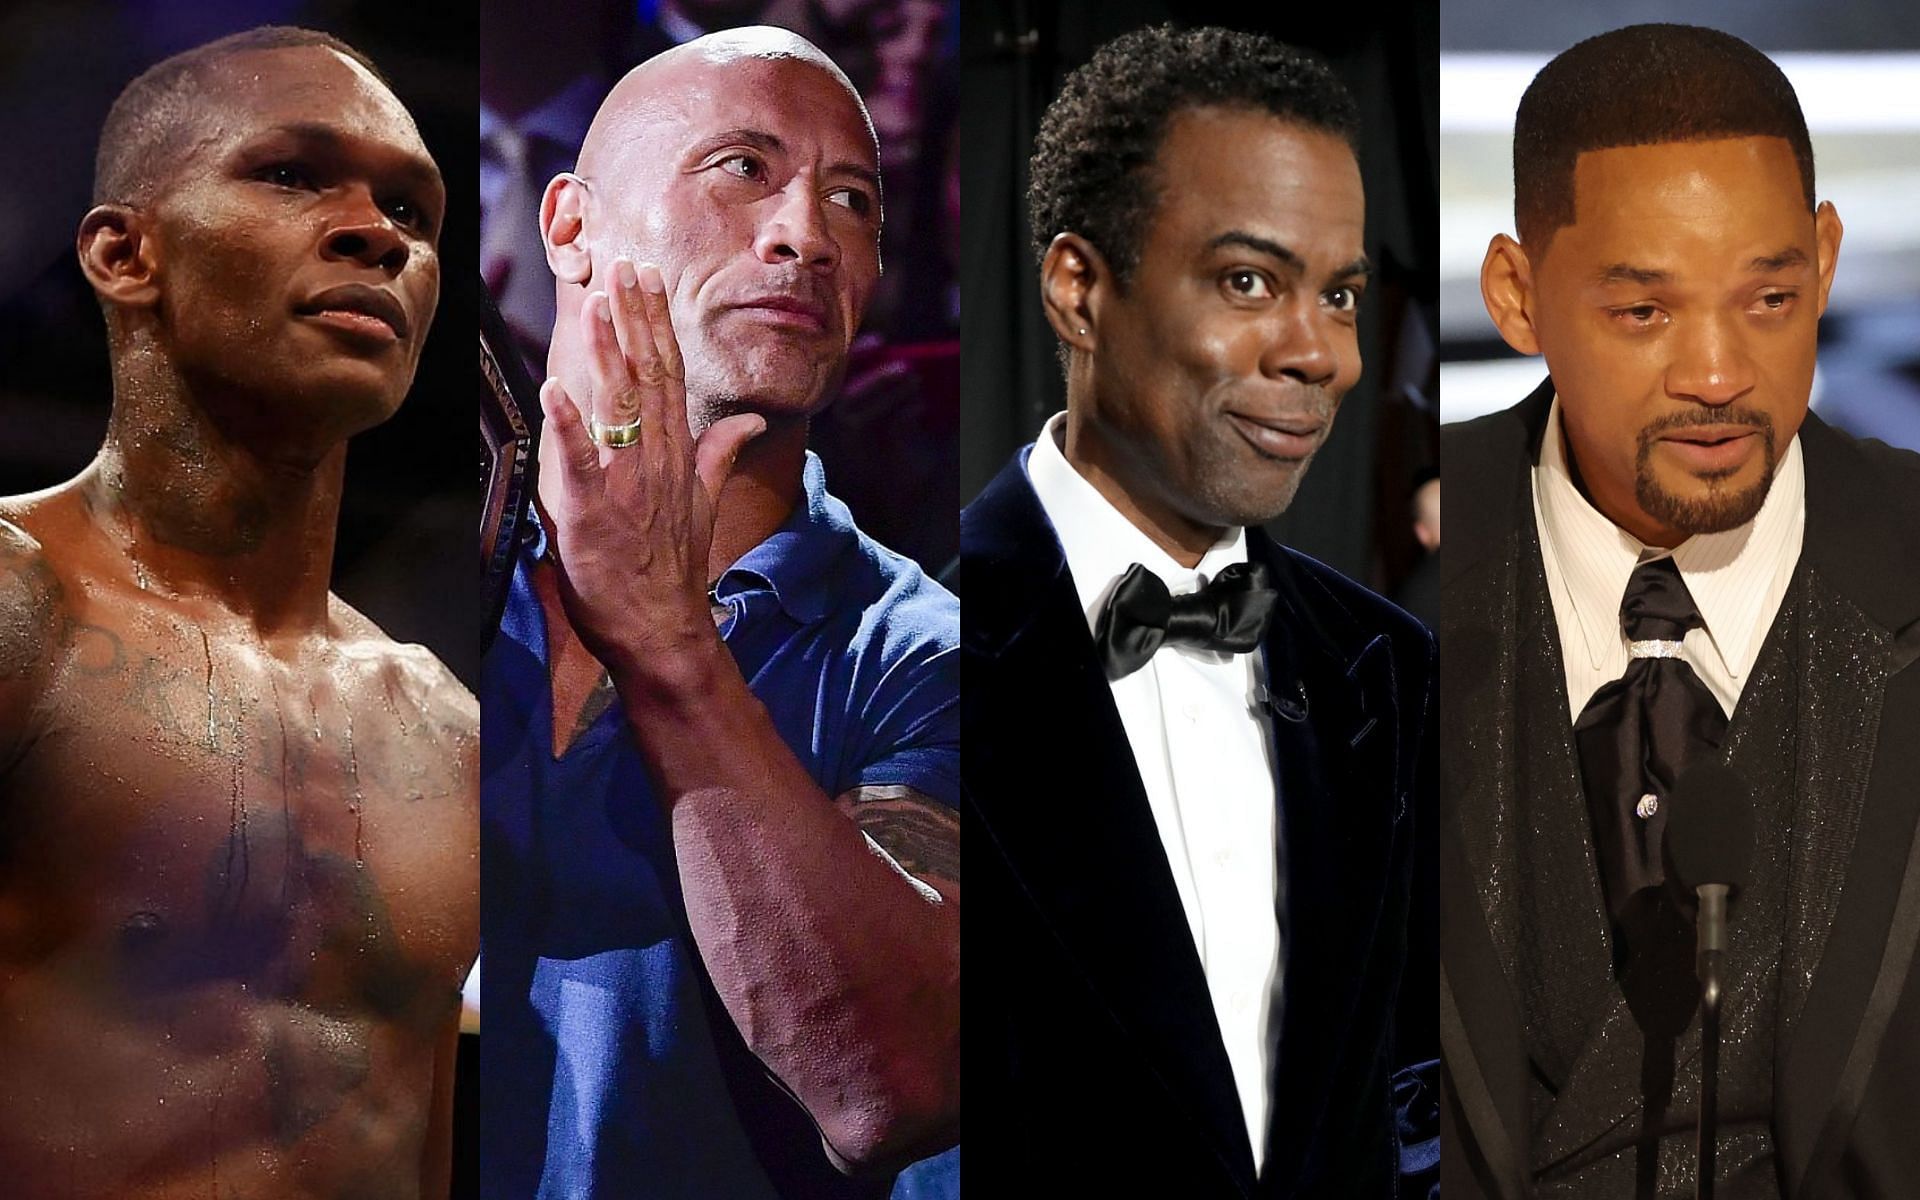 L-R: Israel Adesanya, The Rock, Chris Rock, and Will Smith [Photo credit: @Complex on Twitter]